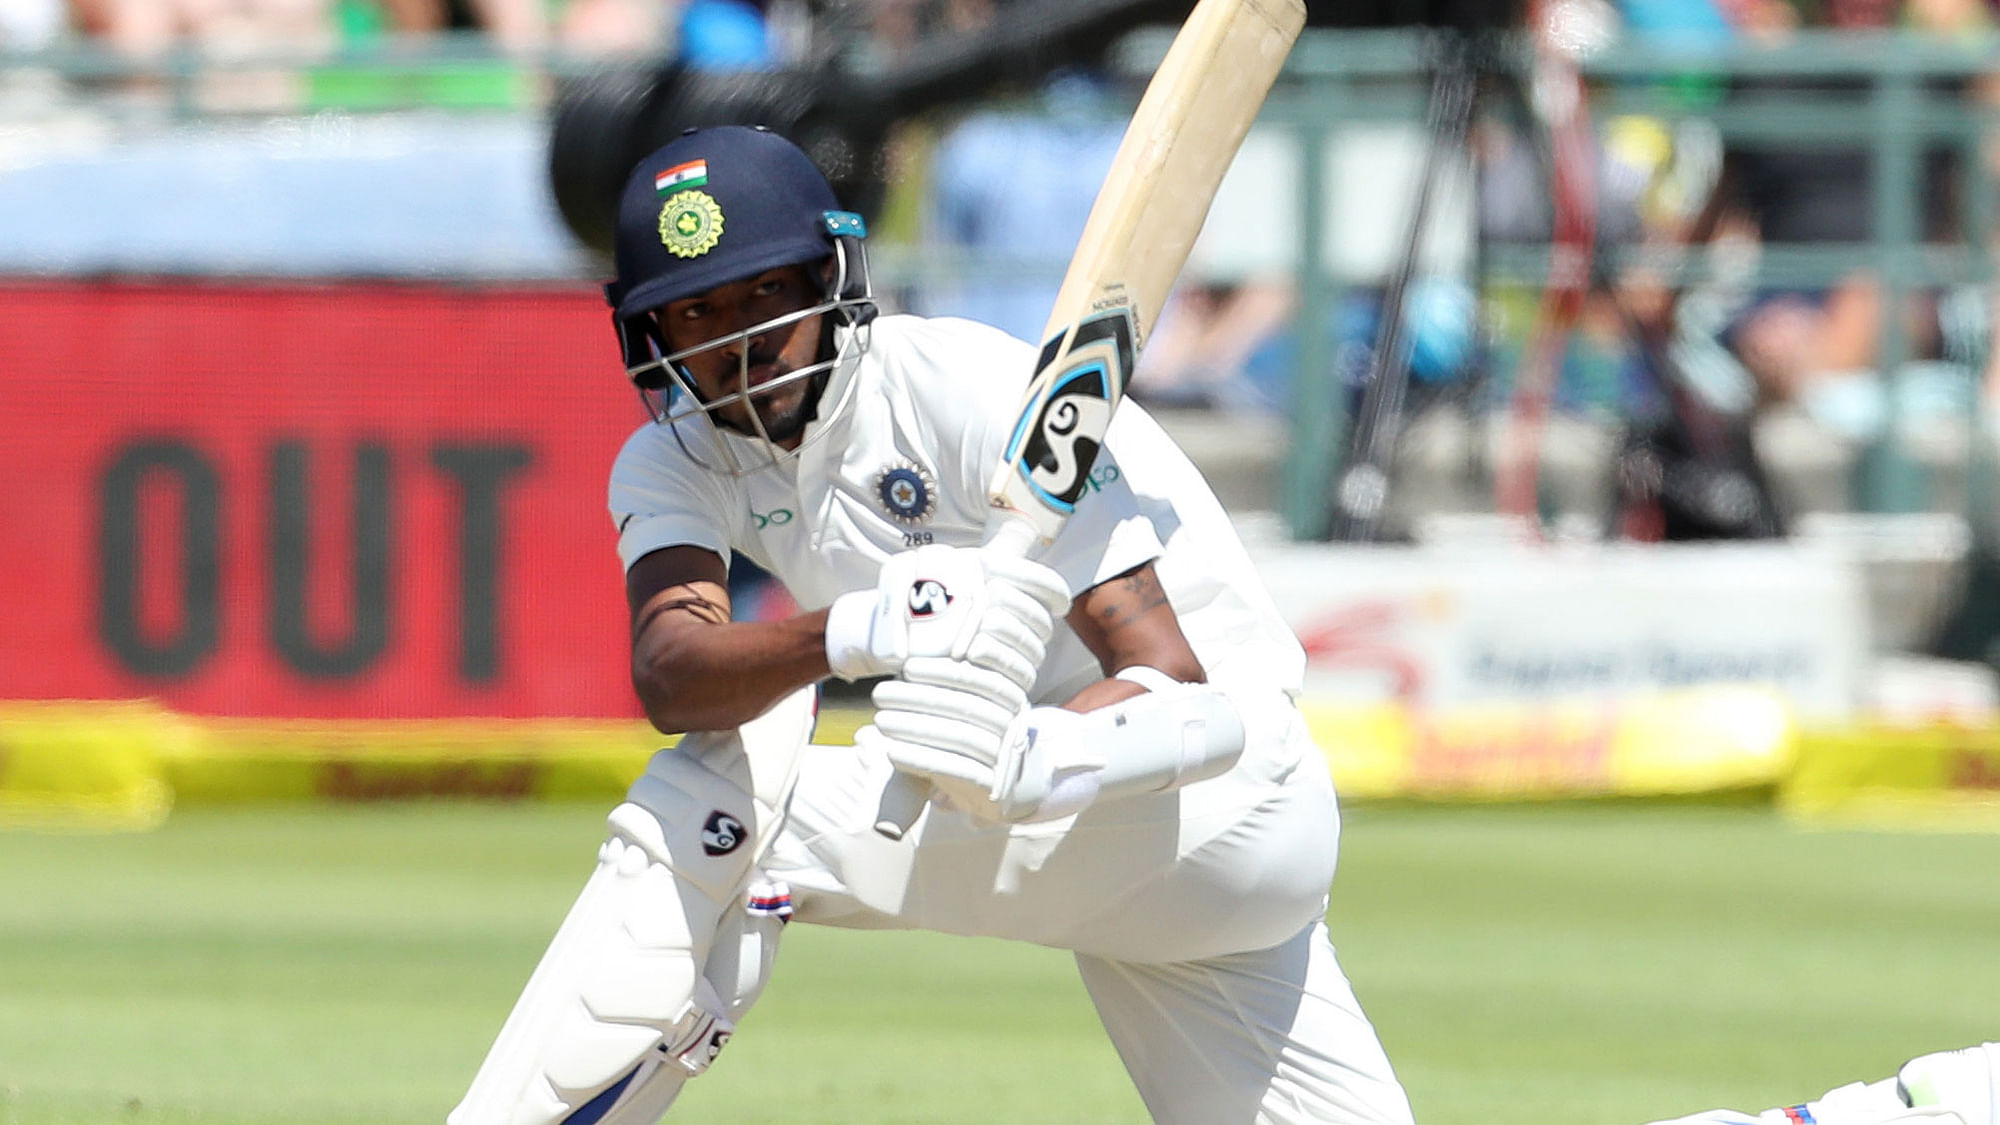 India’s Hardik Pandya scored 93 runs off 95 balls on Day 2 of the first Test against South Africa.